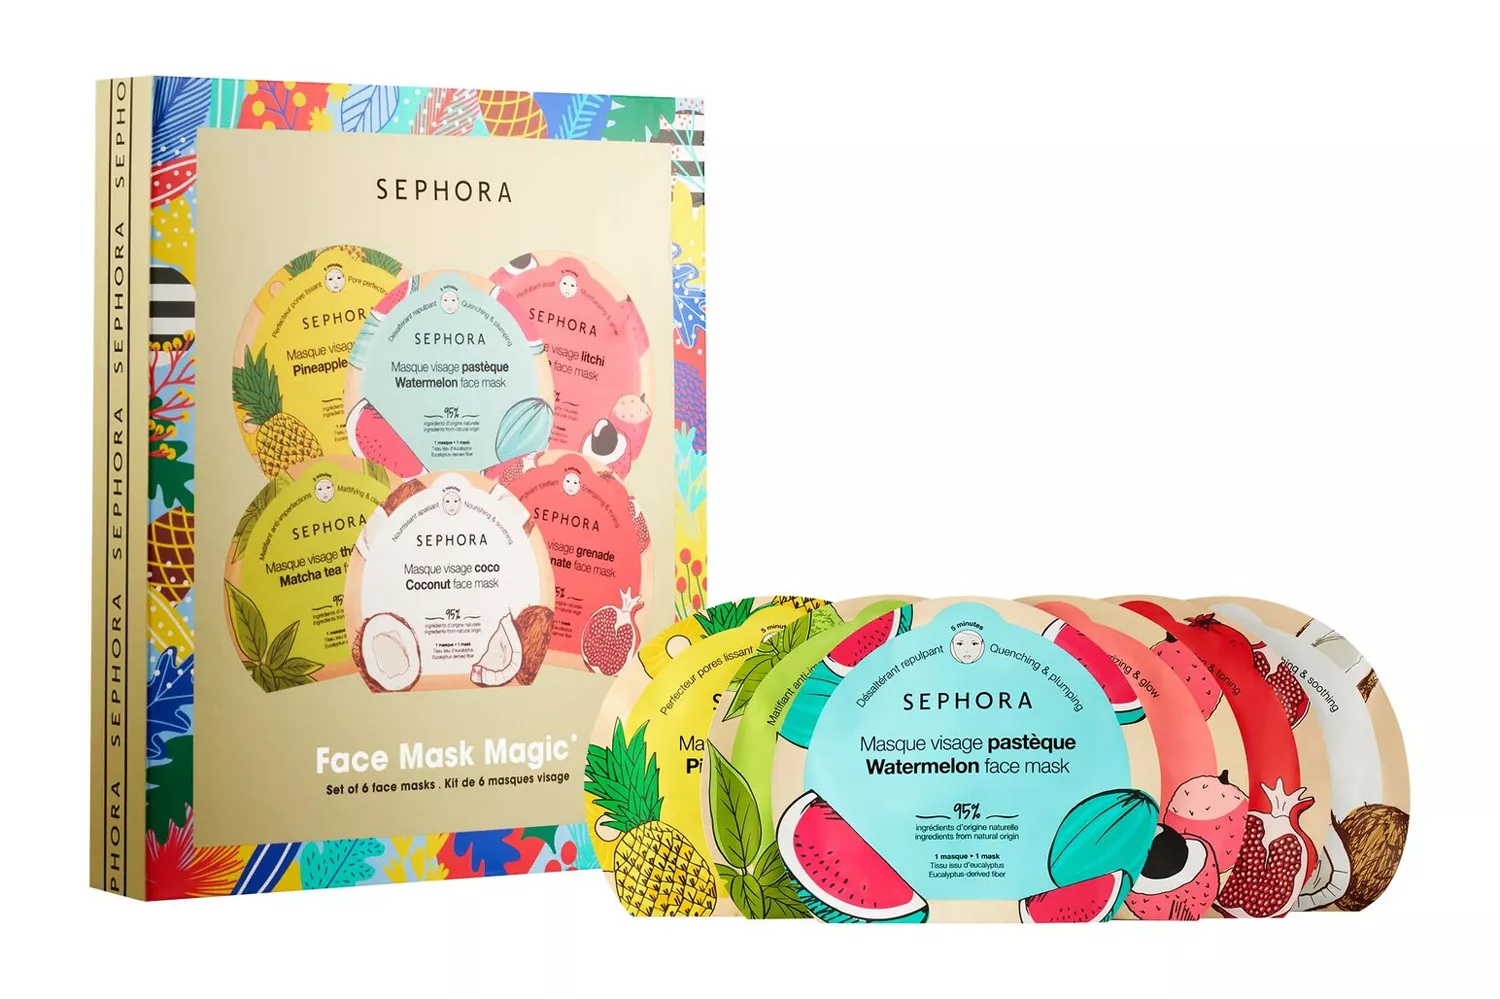 Sephora Collection Wishing You Face Mask Magic